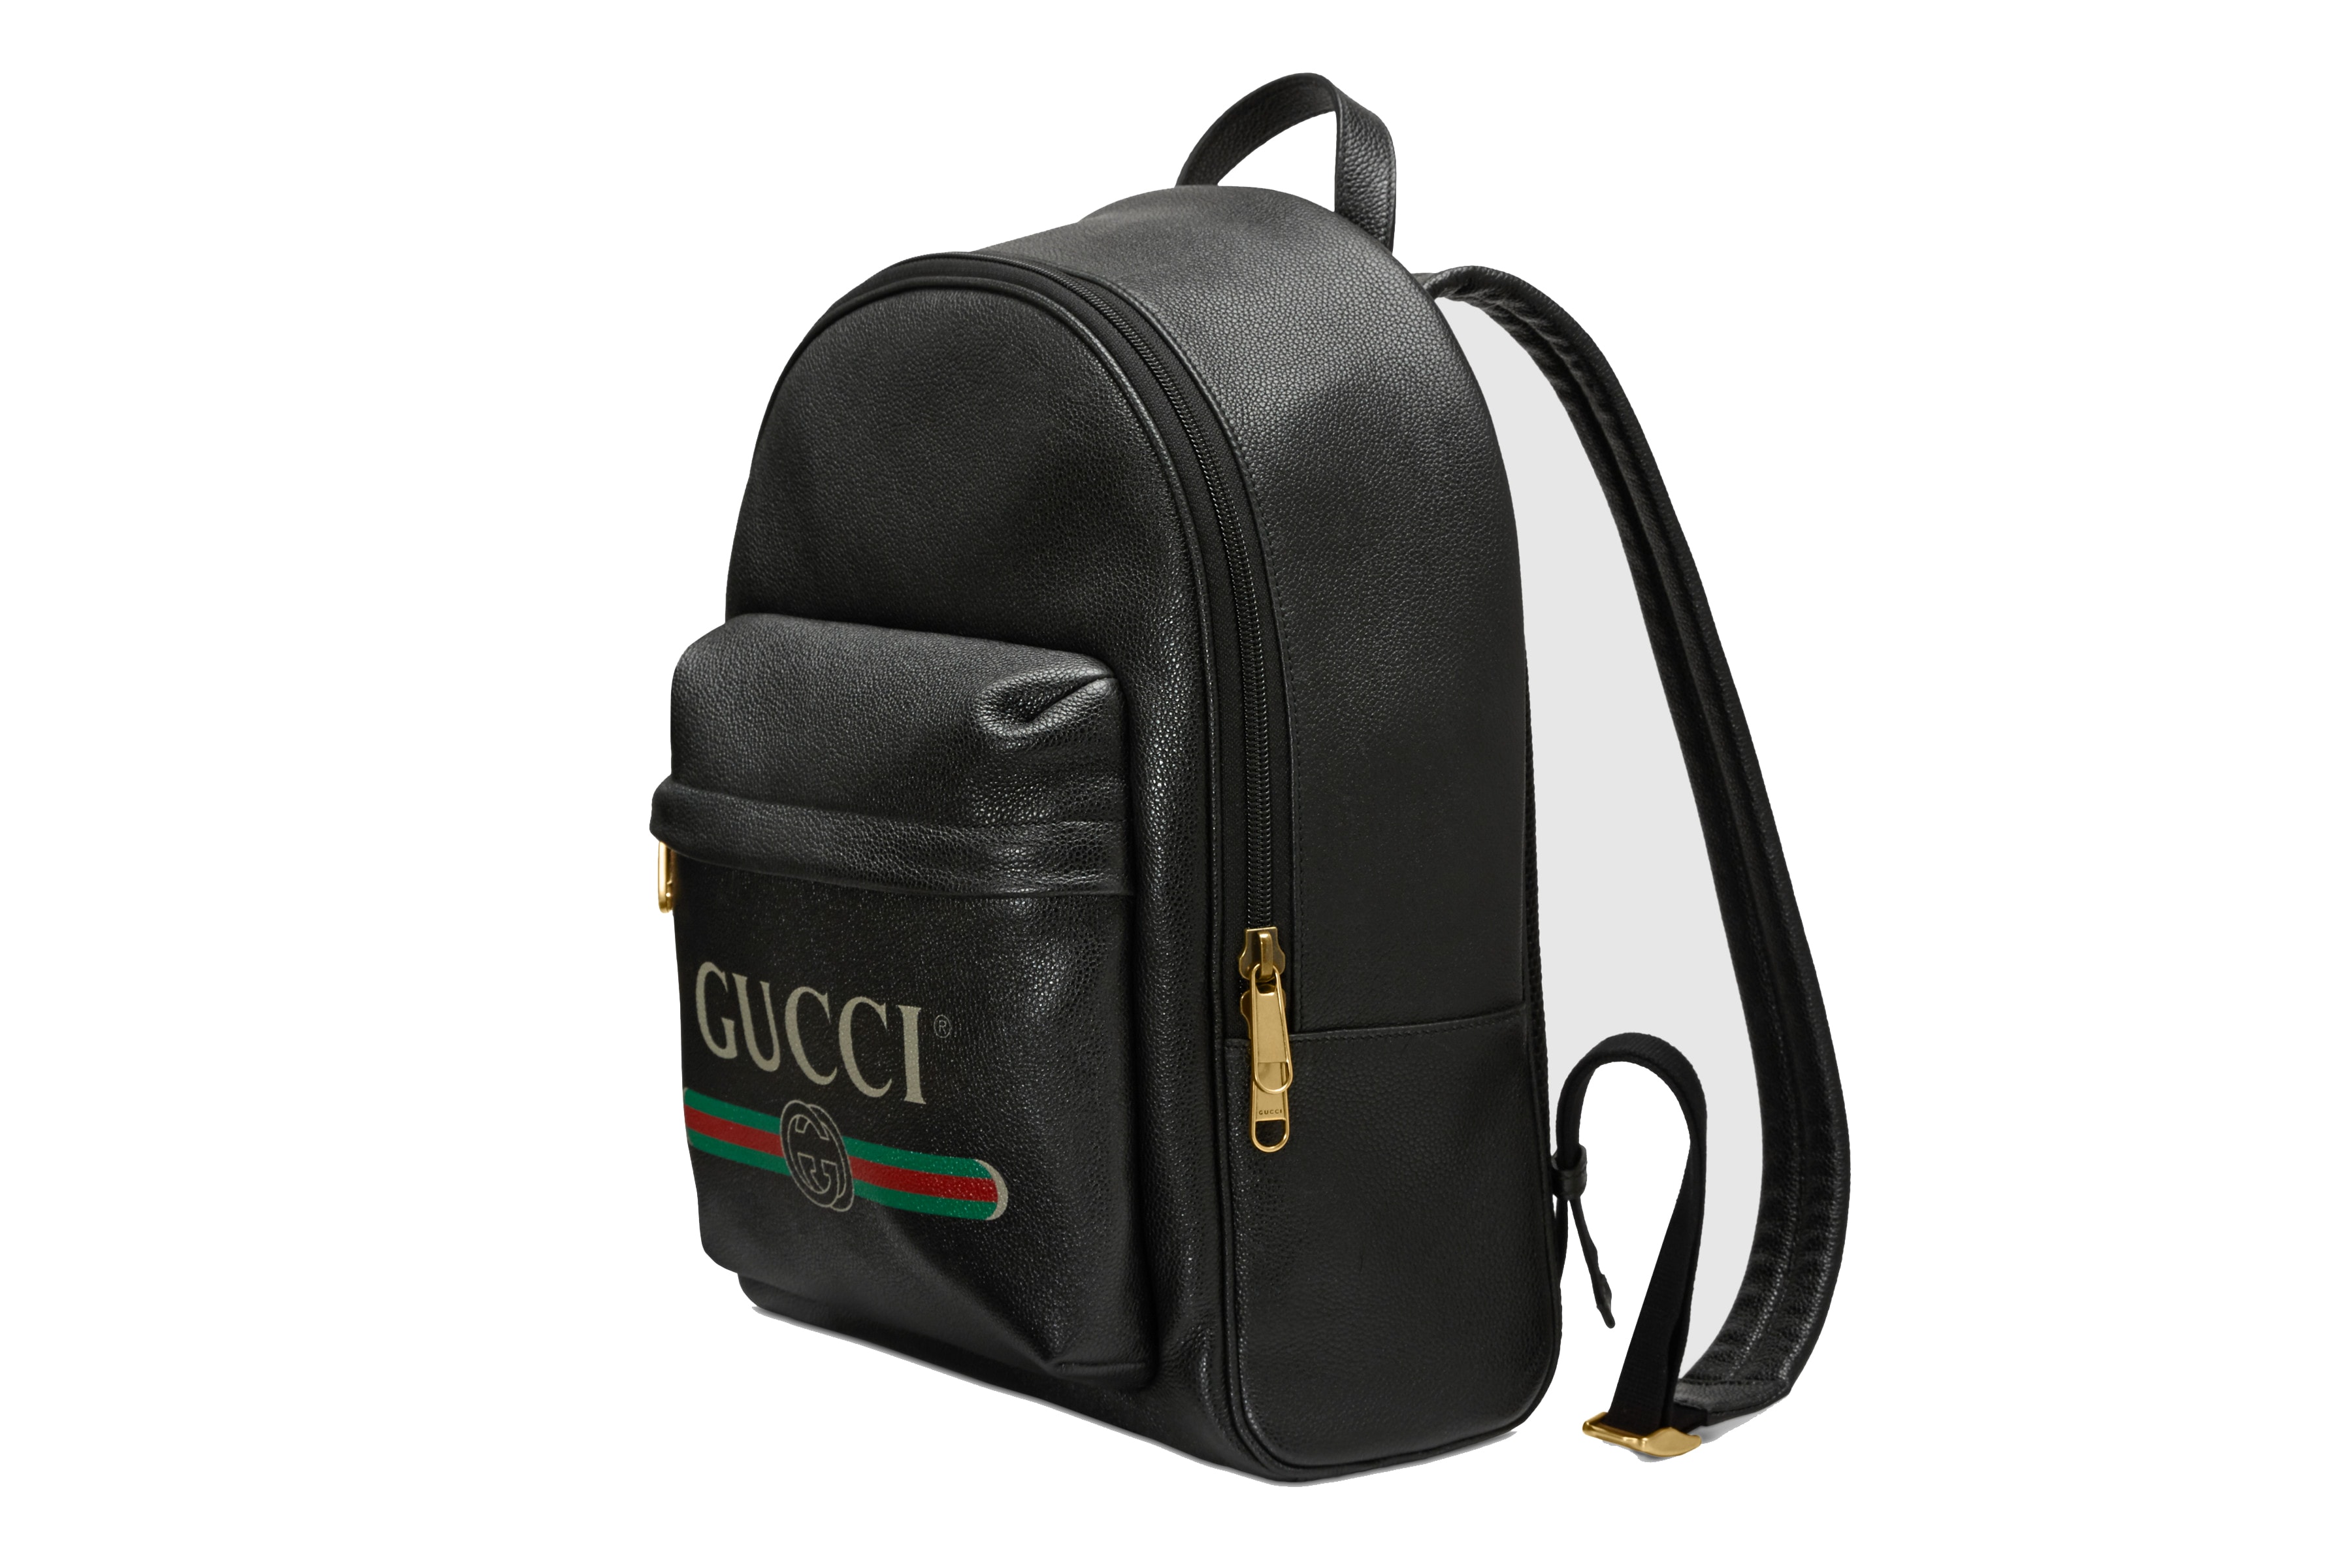 Gucci Marmont top Handle white small bag  White bags style, Gucci small  bag, Leather backpack unisex